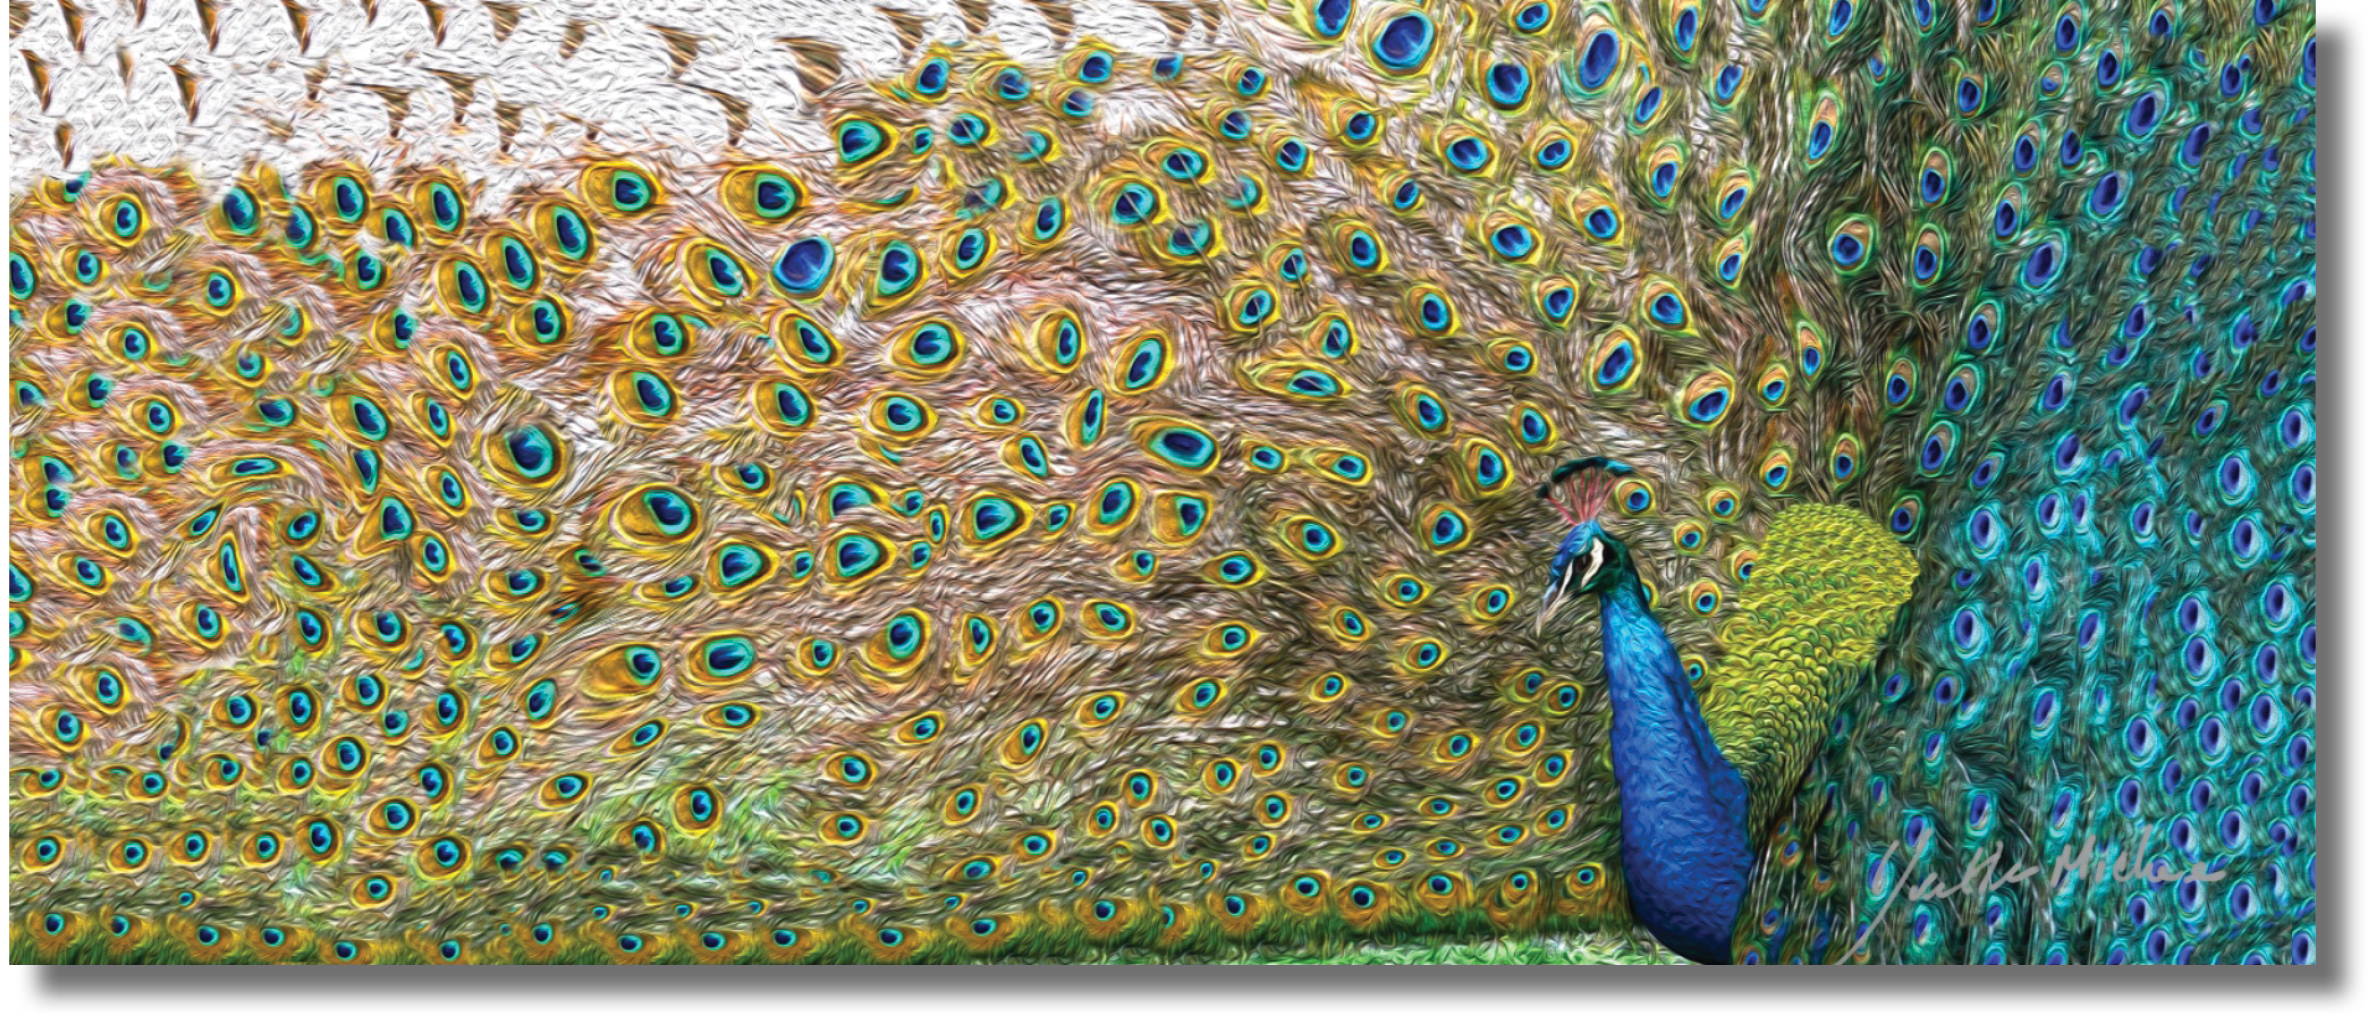 An Extra large impressionist fine art digital painting of a peacock